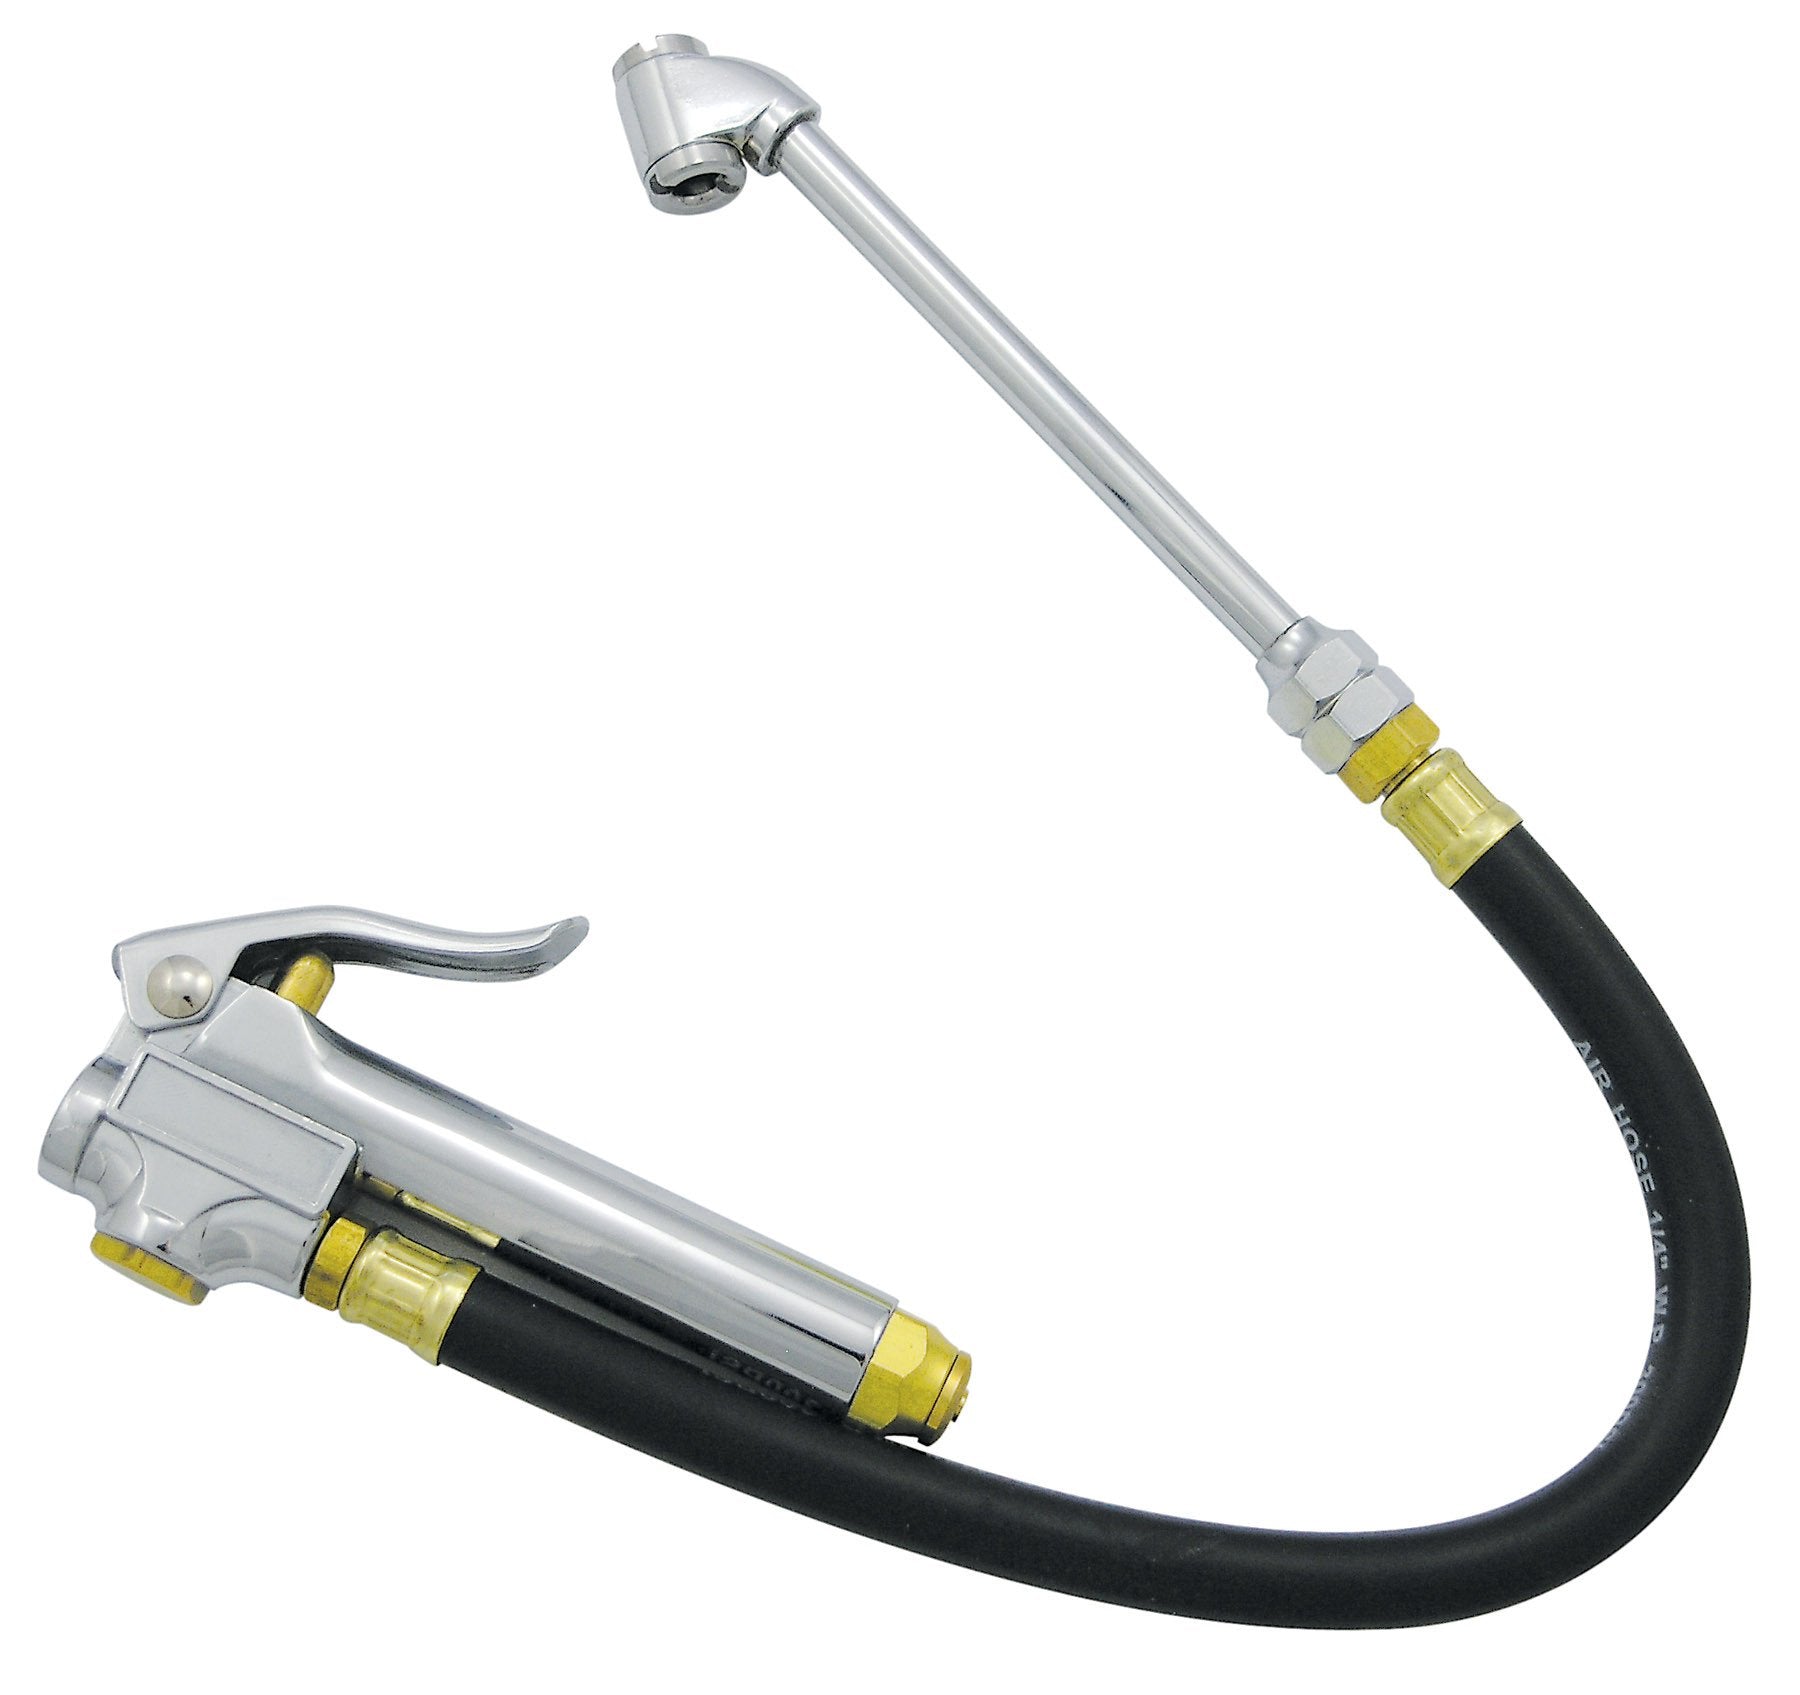 Jet Air Line Inflator With Tire Gauge | Bayonet / Slide Type Automotive Tools - Cleanflow